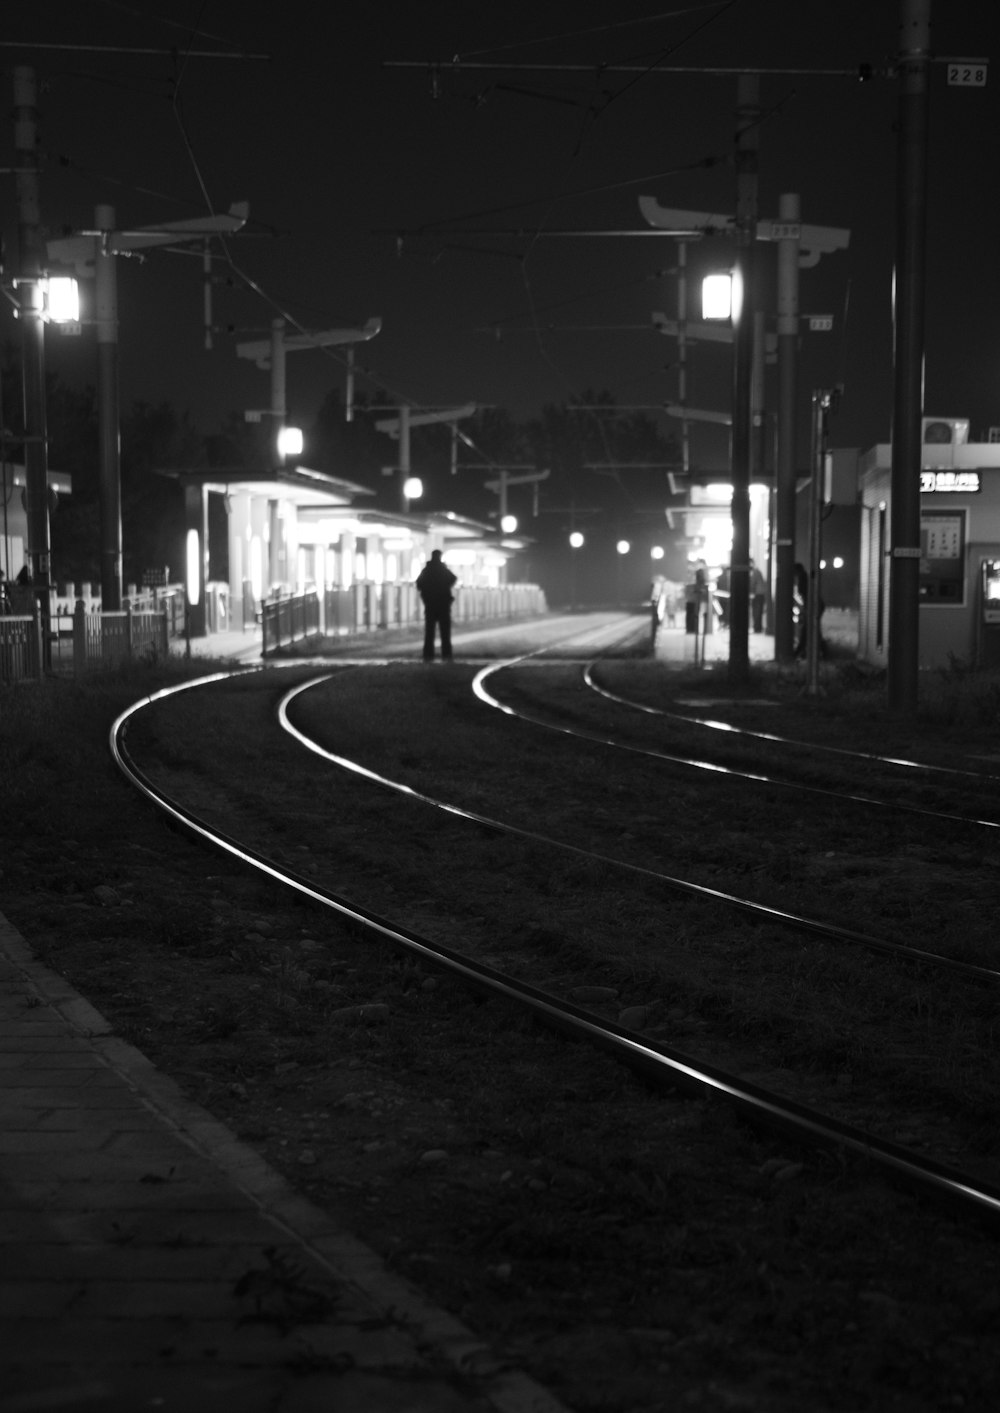 a person standing on a train track at night